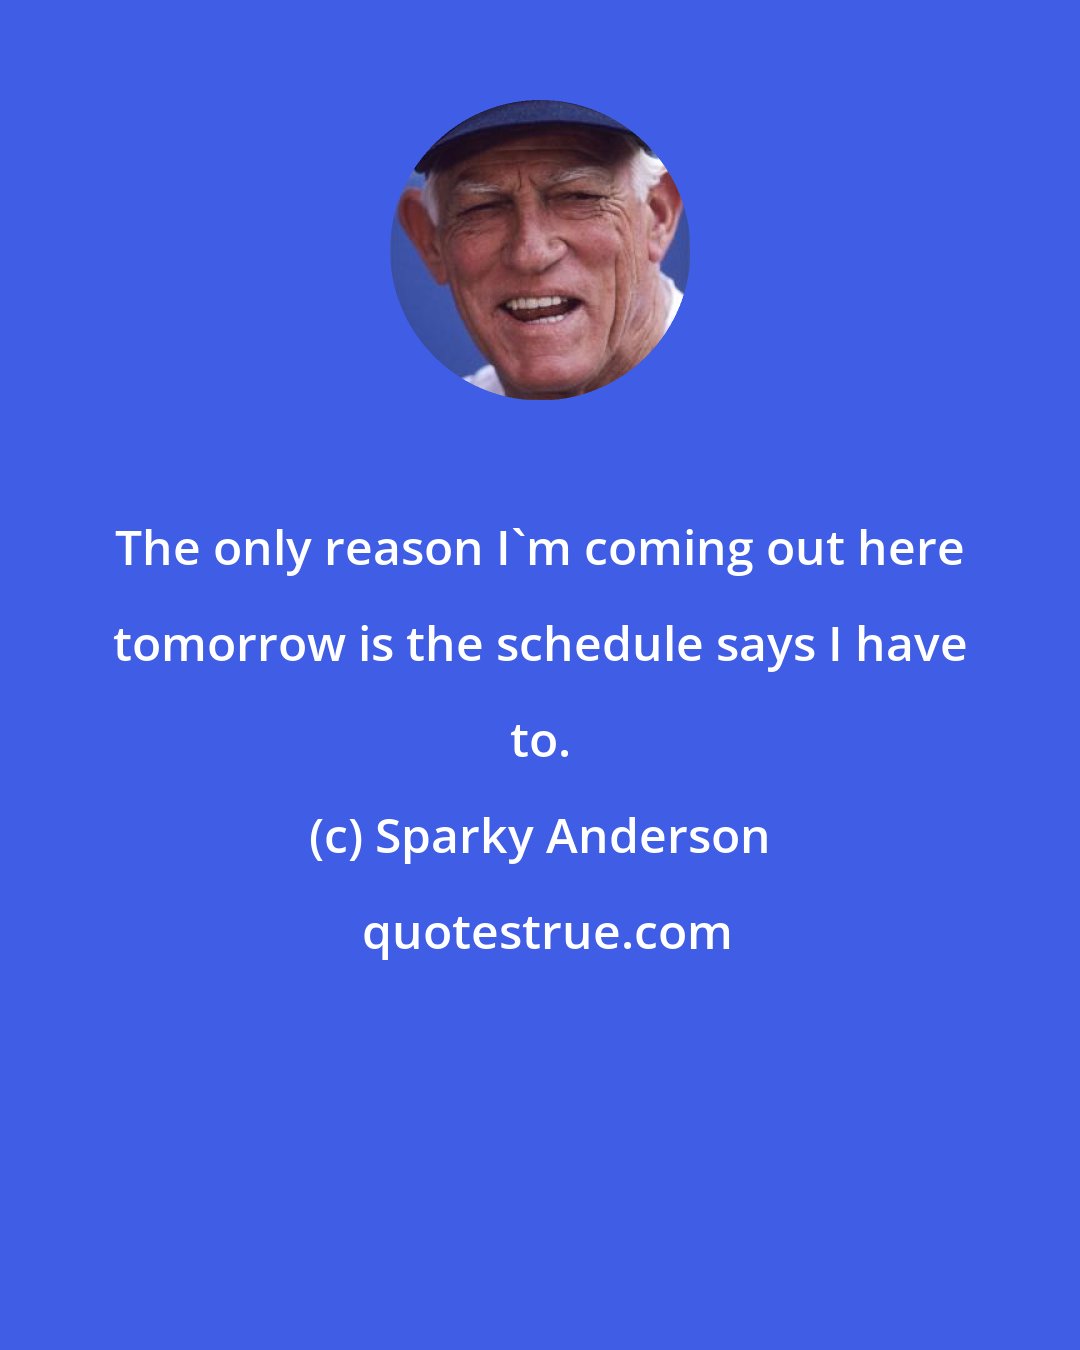 Sparky Anderson: The only reason I'm coming out here tomorrow is the schedule says I have to.